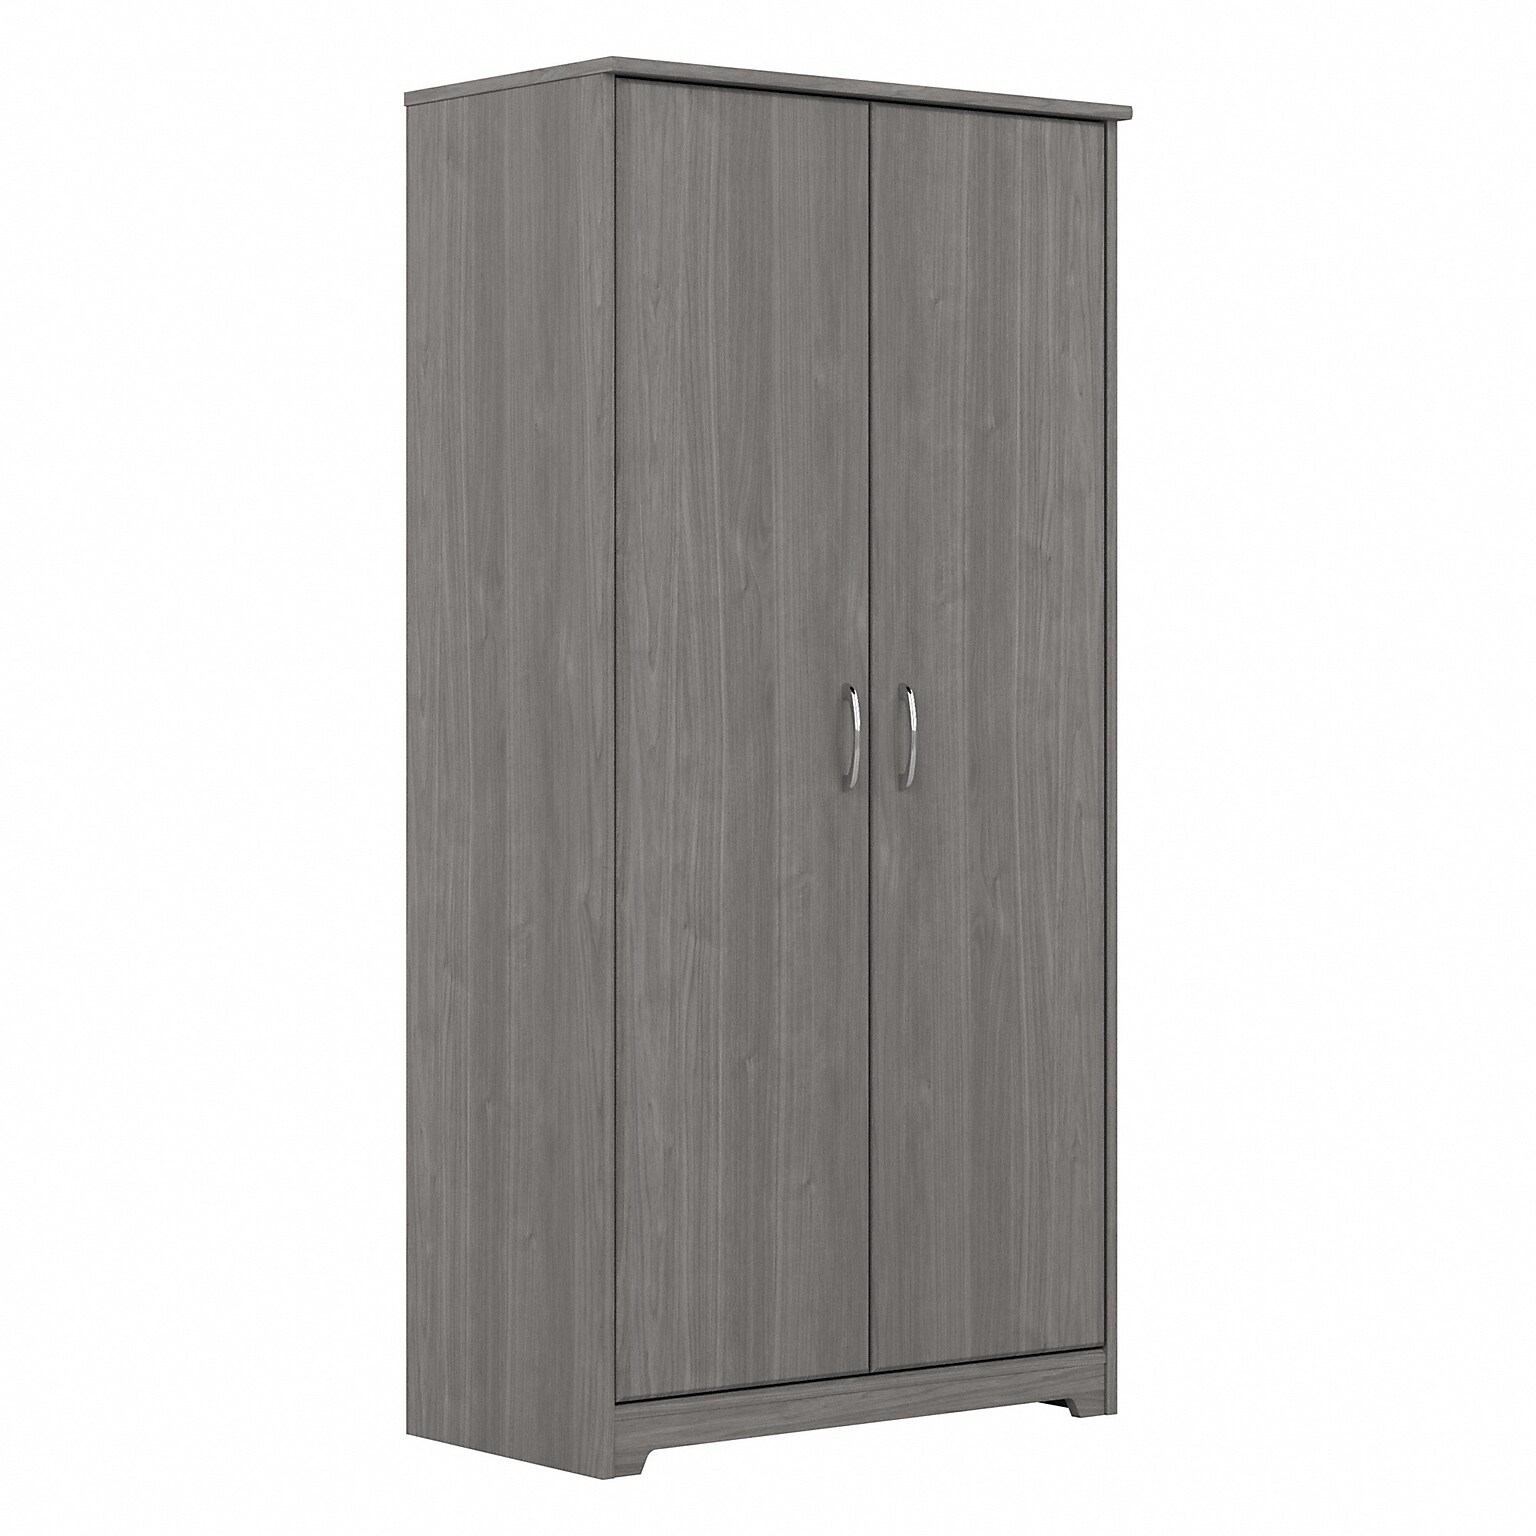 Bush Furniture Cabot 61.14 Storage Cabinet with 4 Shelves, Modern Gray (WC31399)